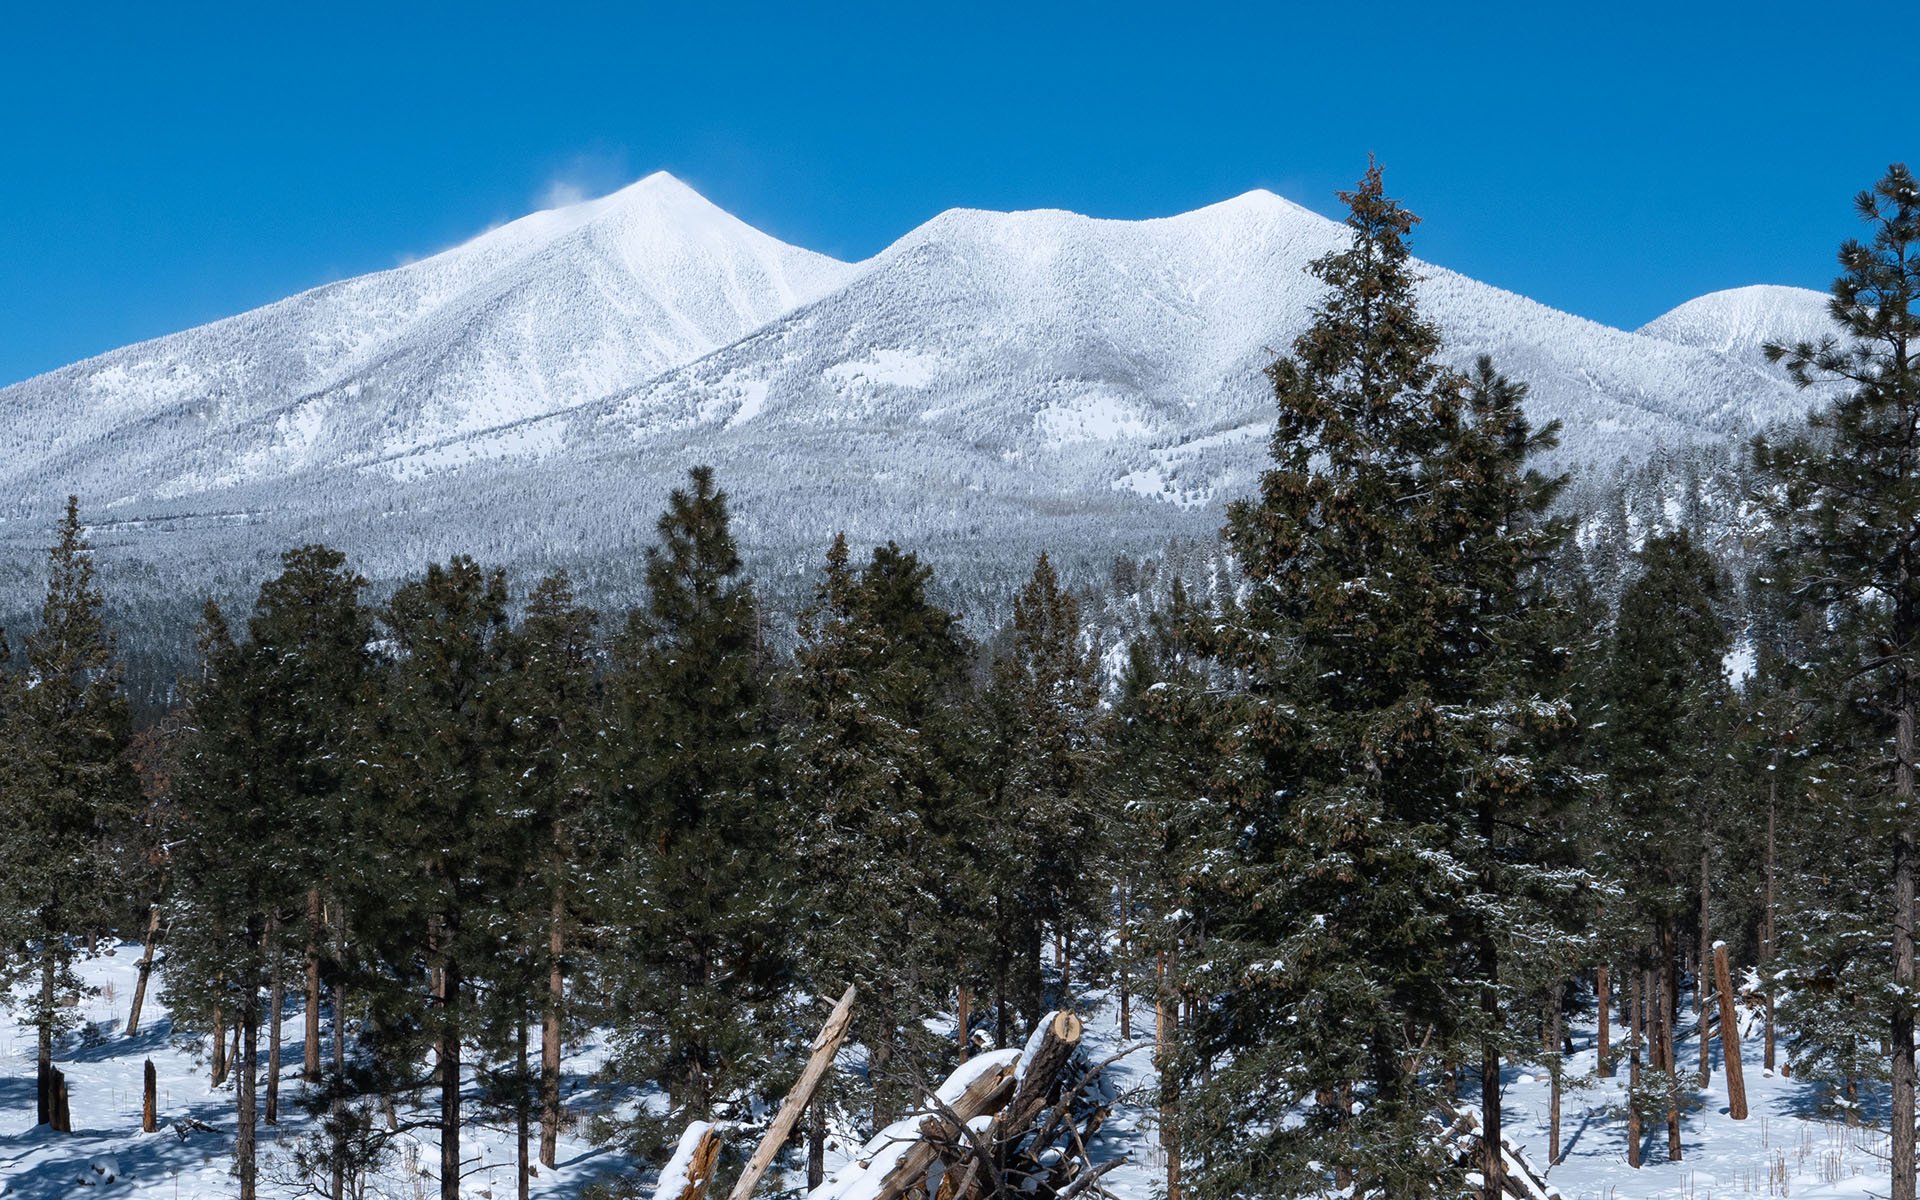 Snowy San Francisco Peaks from Dry Lakes Hills